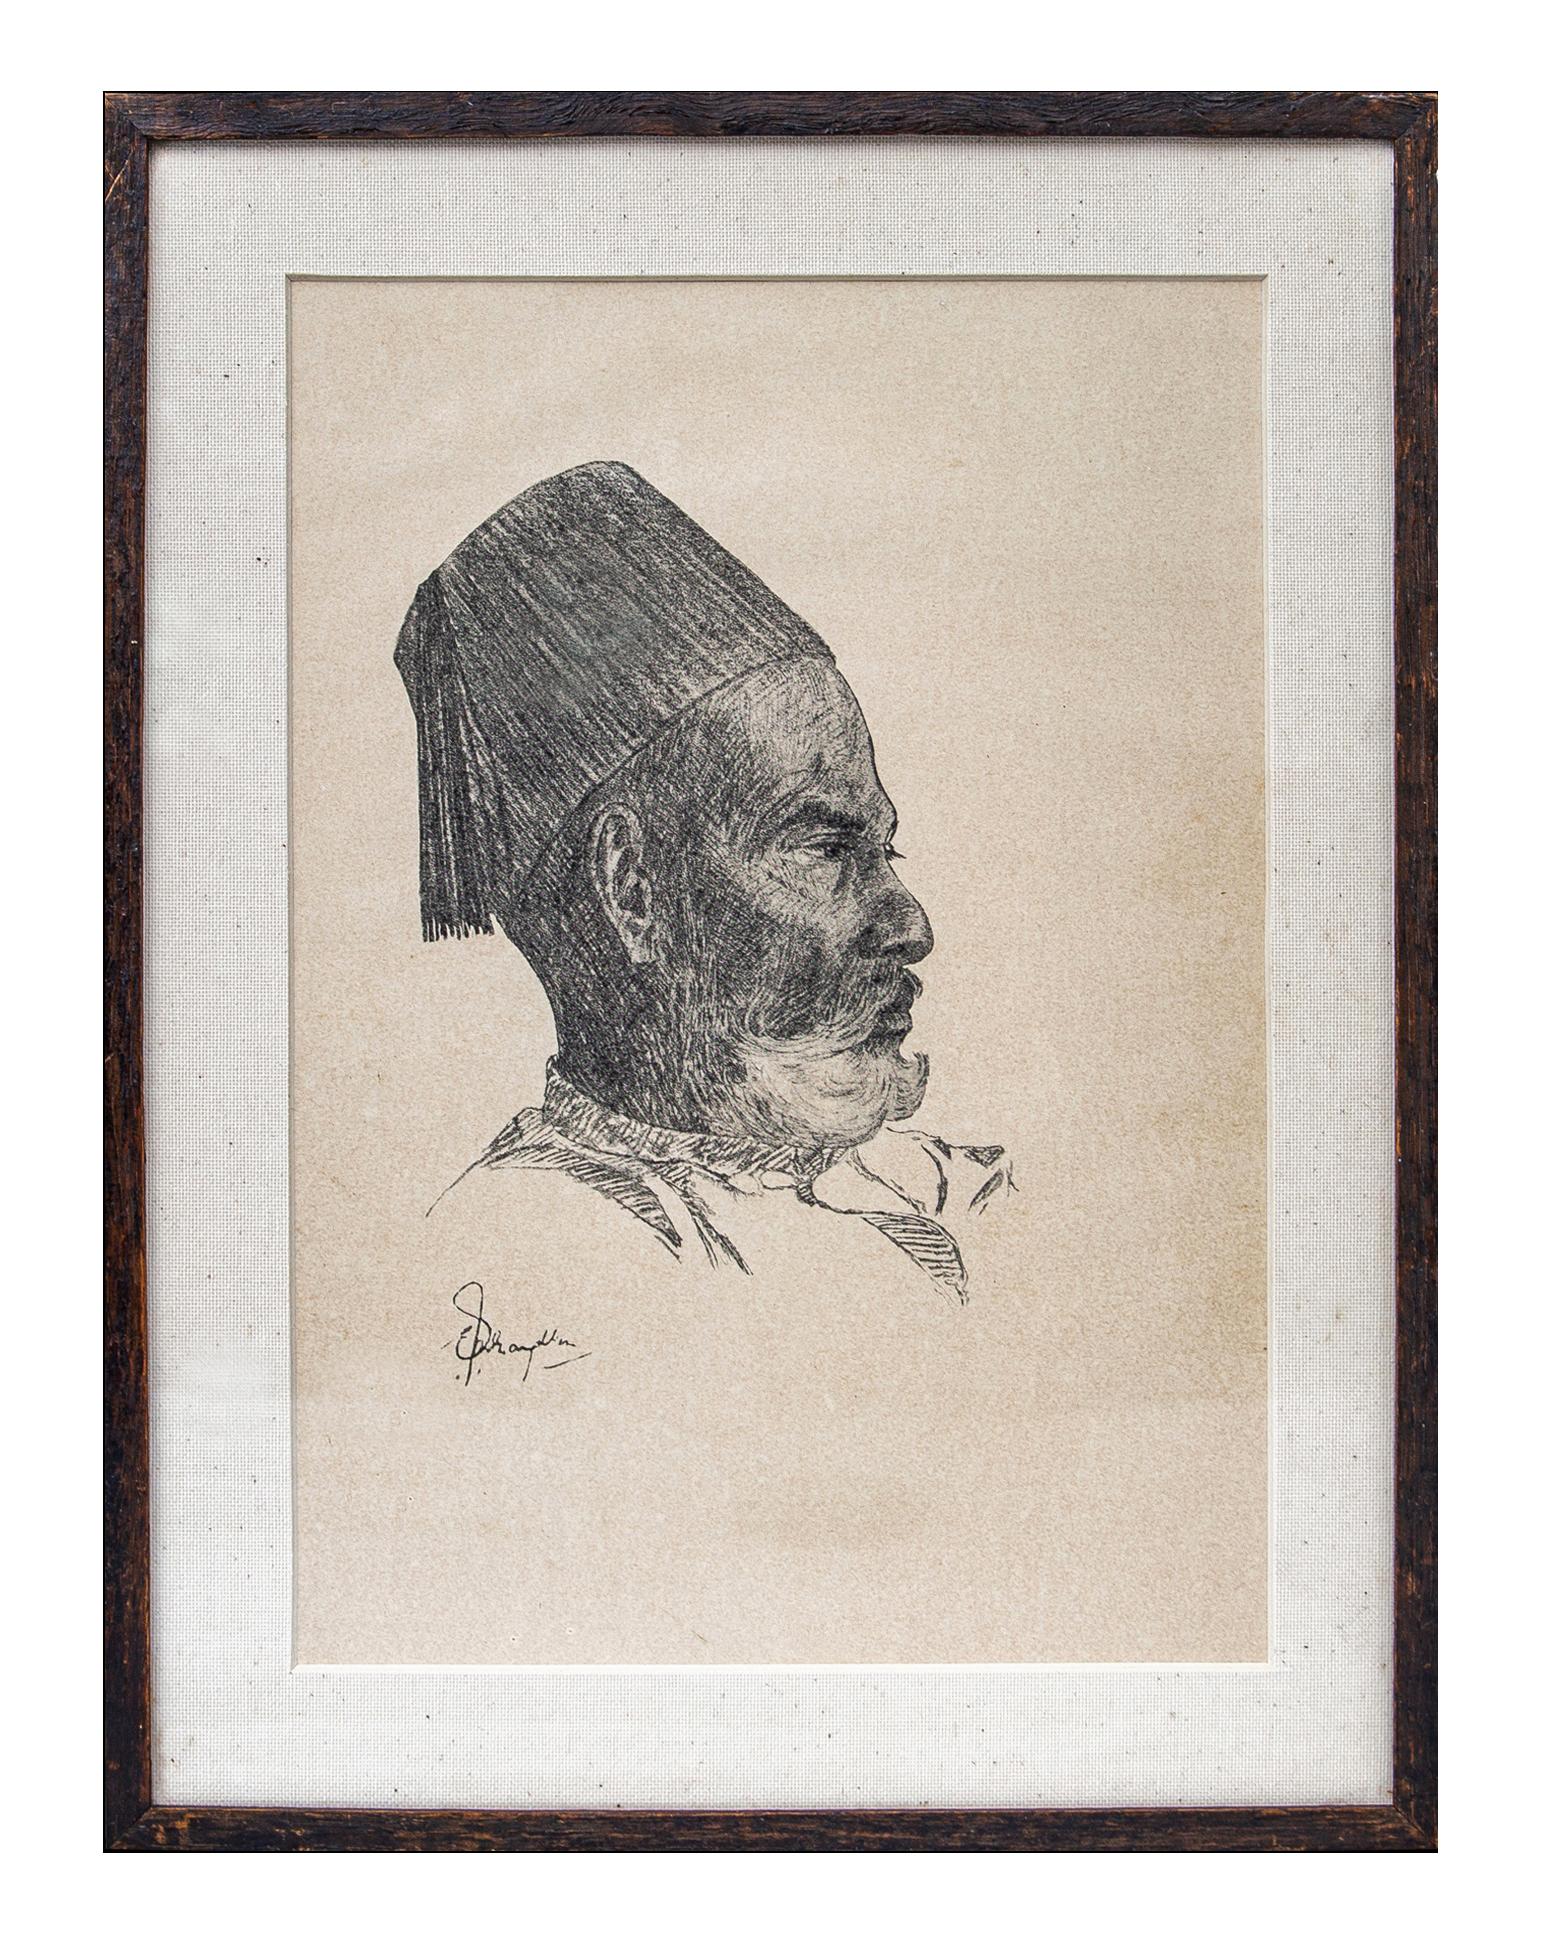 Three highly charismatic and personal portrait drawings if Indian gentlemen. Dating from the late 19th century and in original glass and oak frames they portray a Pathan hillman and a Sikh watchman from the Punjab, as well as a Muhammadan Lapidary